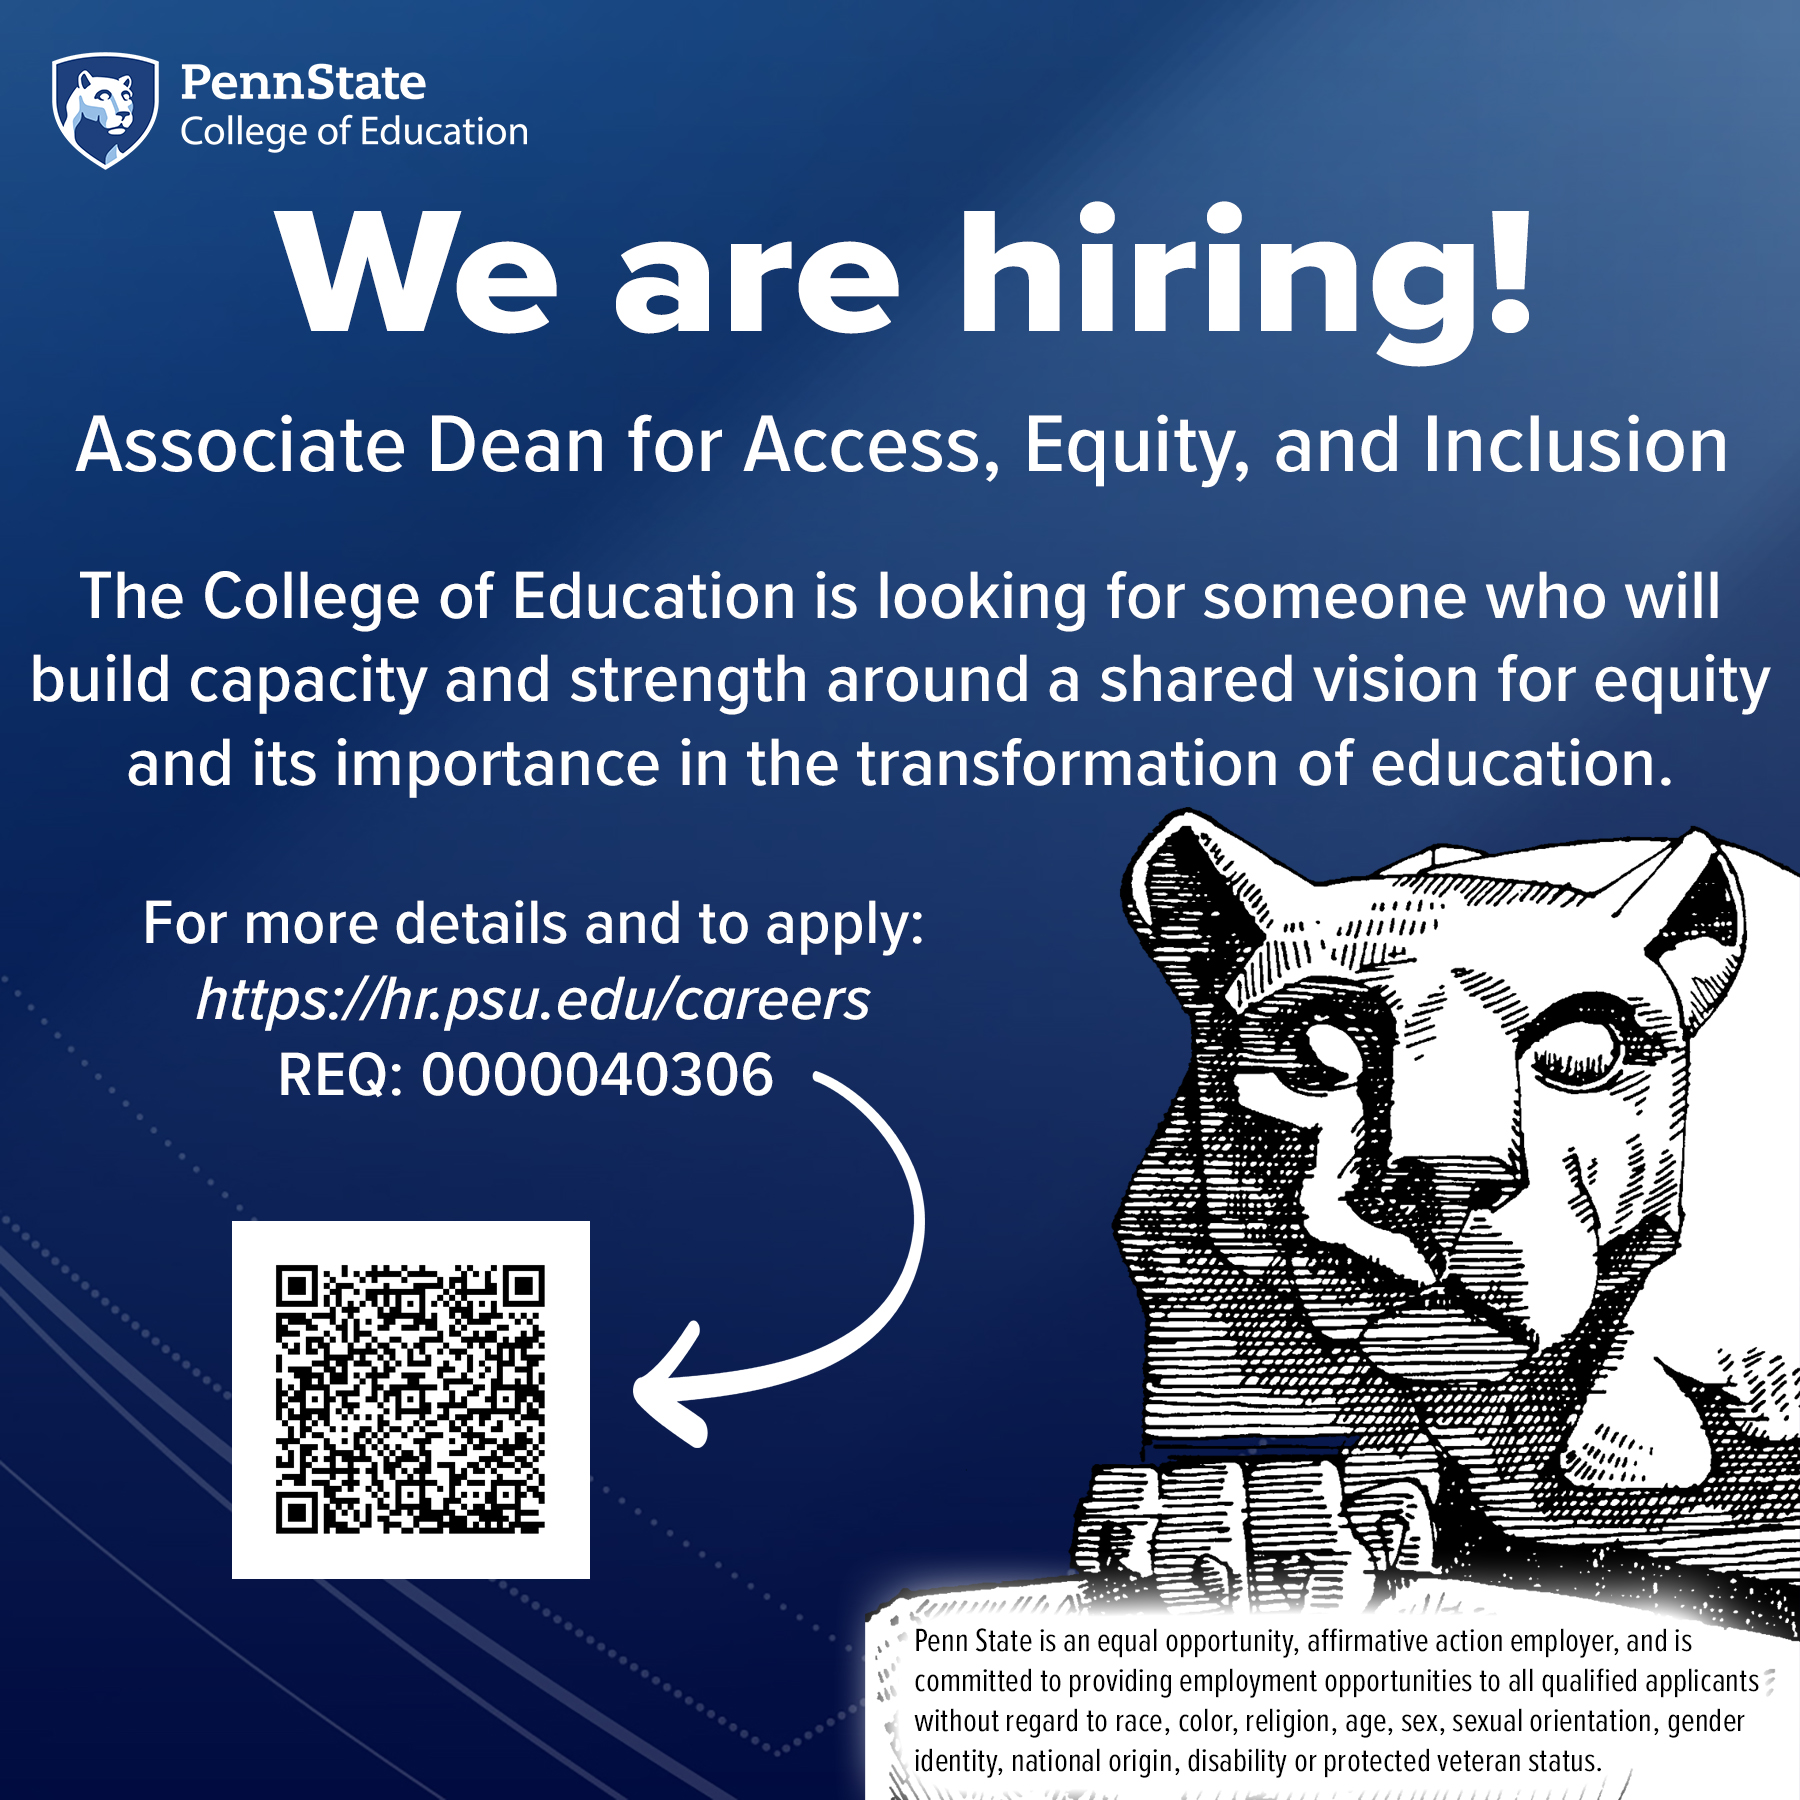 Associate Dean, Access, Equity, and Inclusion at the College of Education